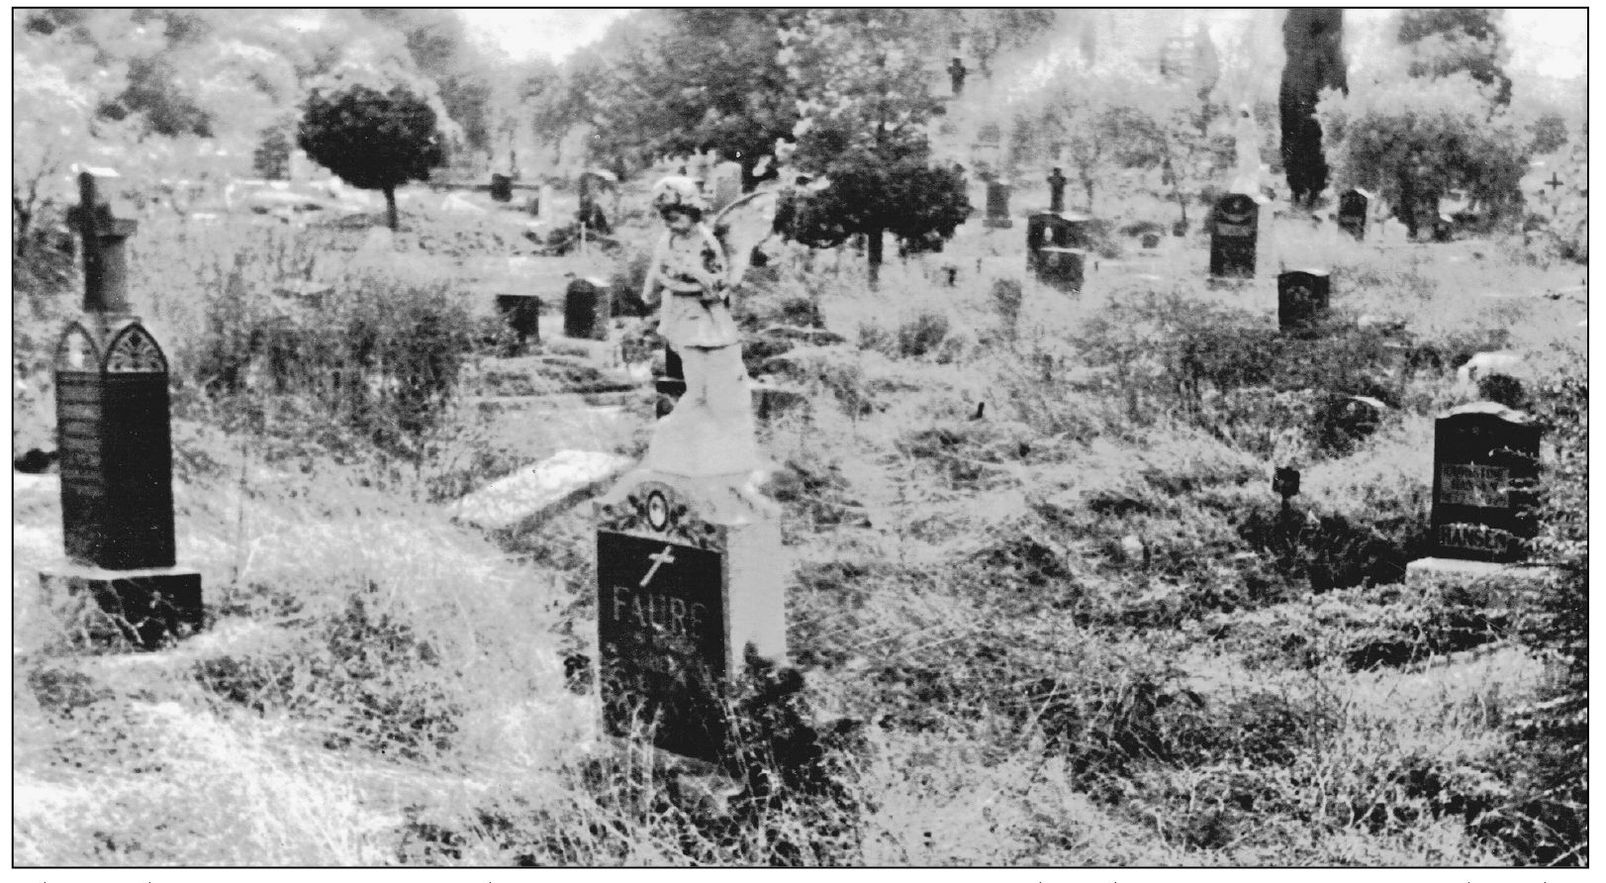 The Wilmington Cemetery began as a private cemetery for the Phineas Banning - photo 12